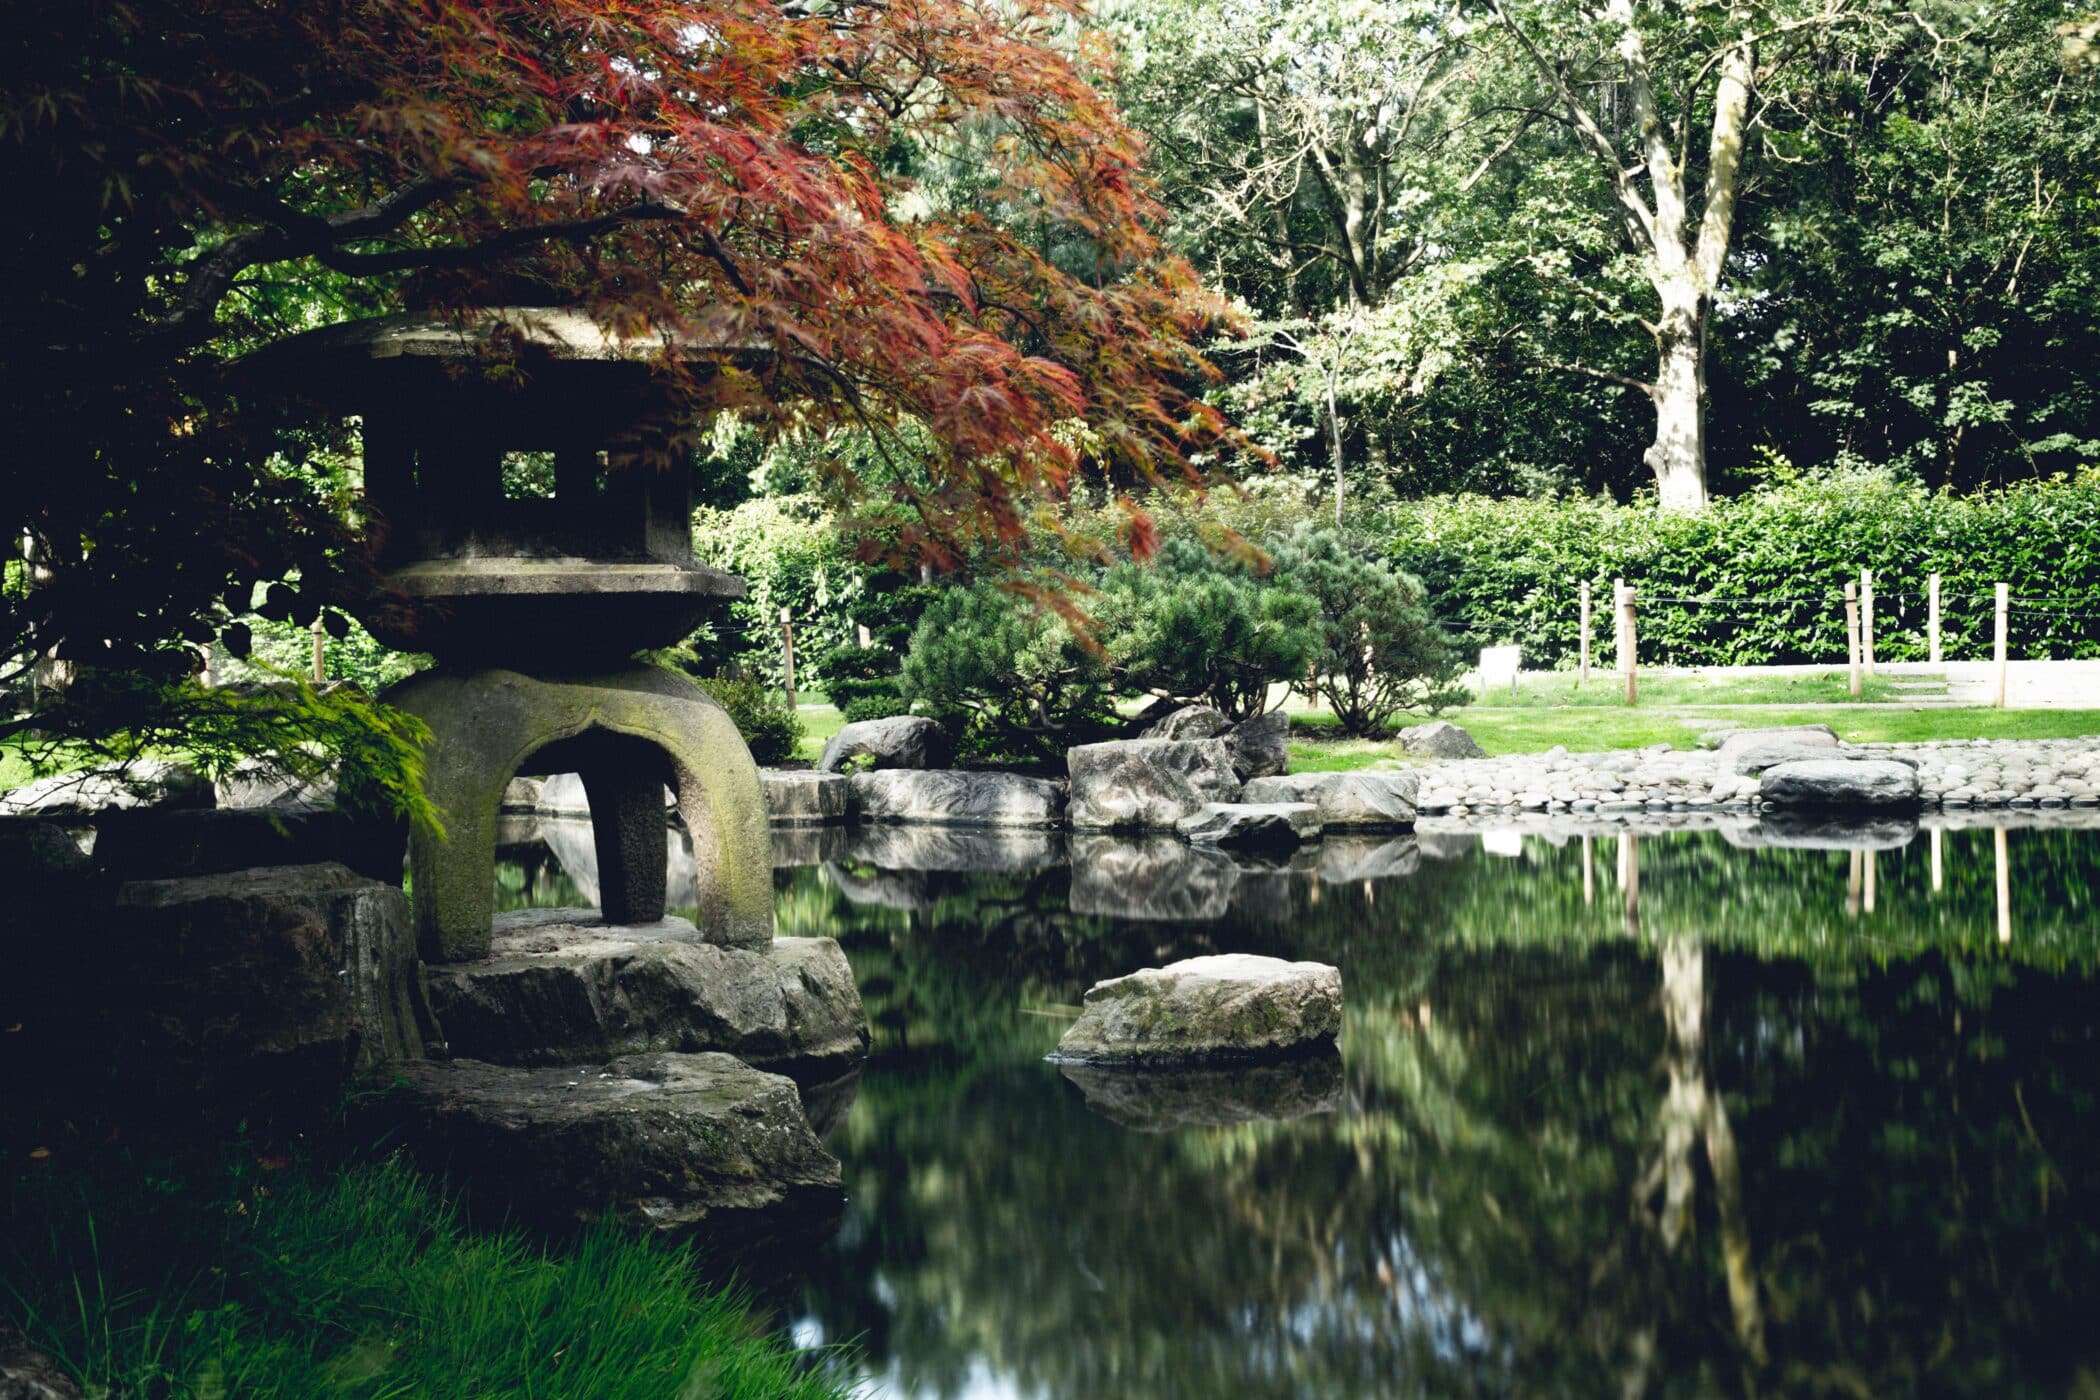 Kyoto Gardens at Holland Park, acer trees and a shrine next to a lake